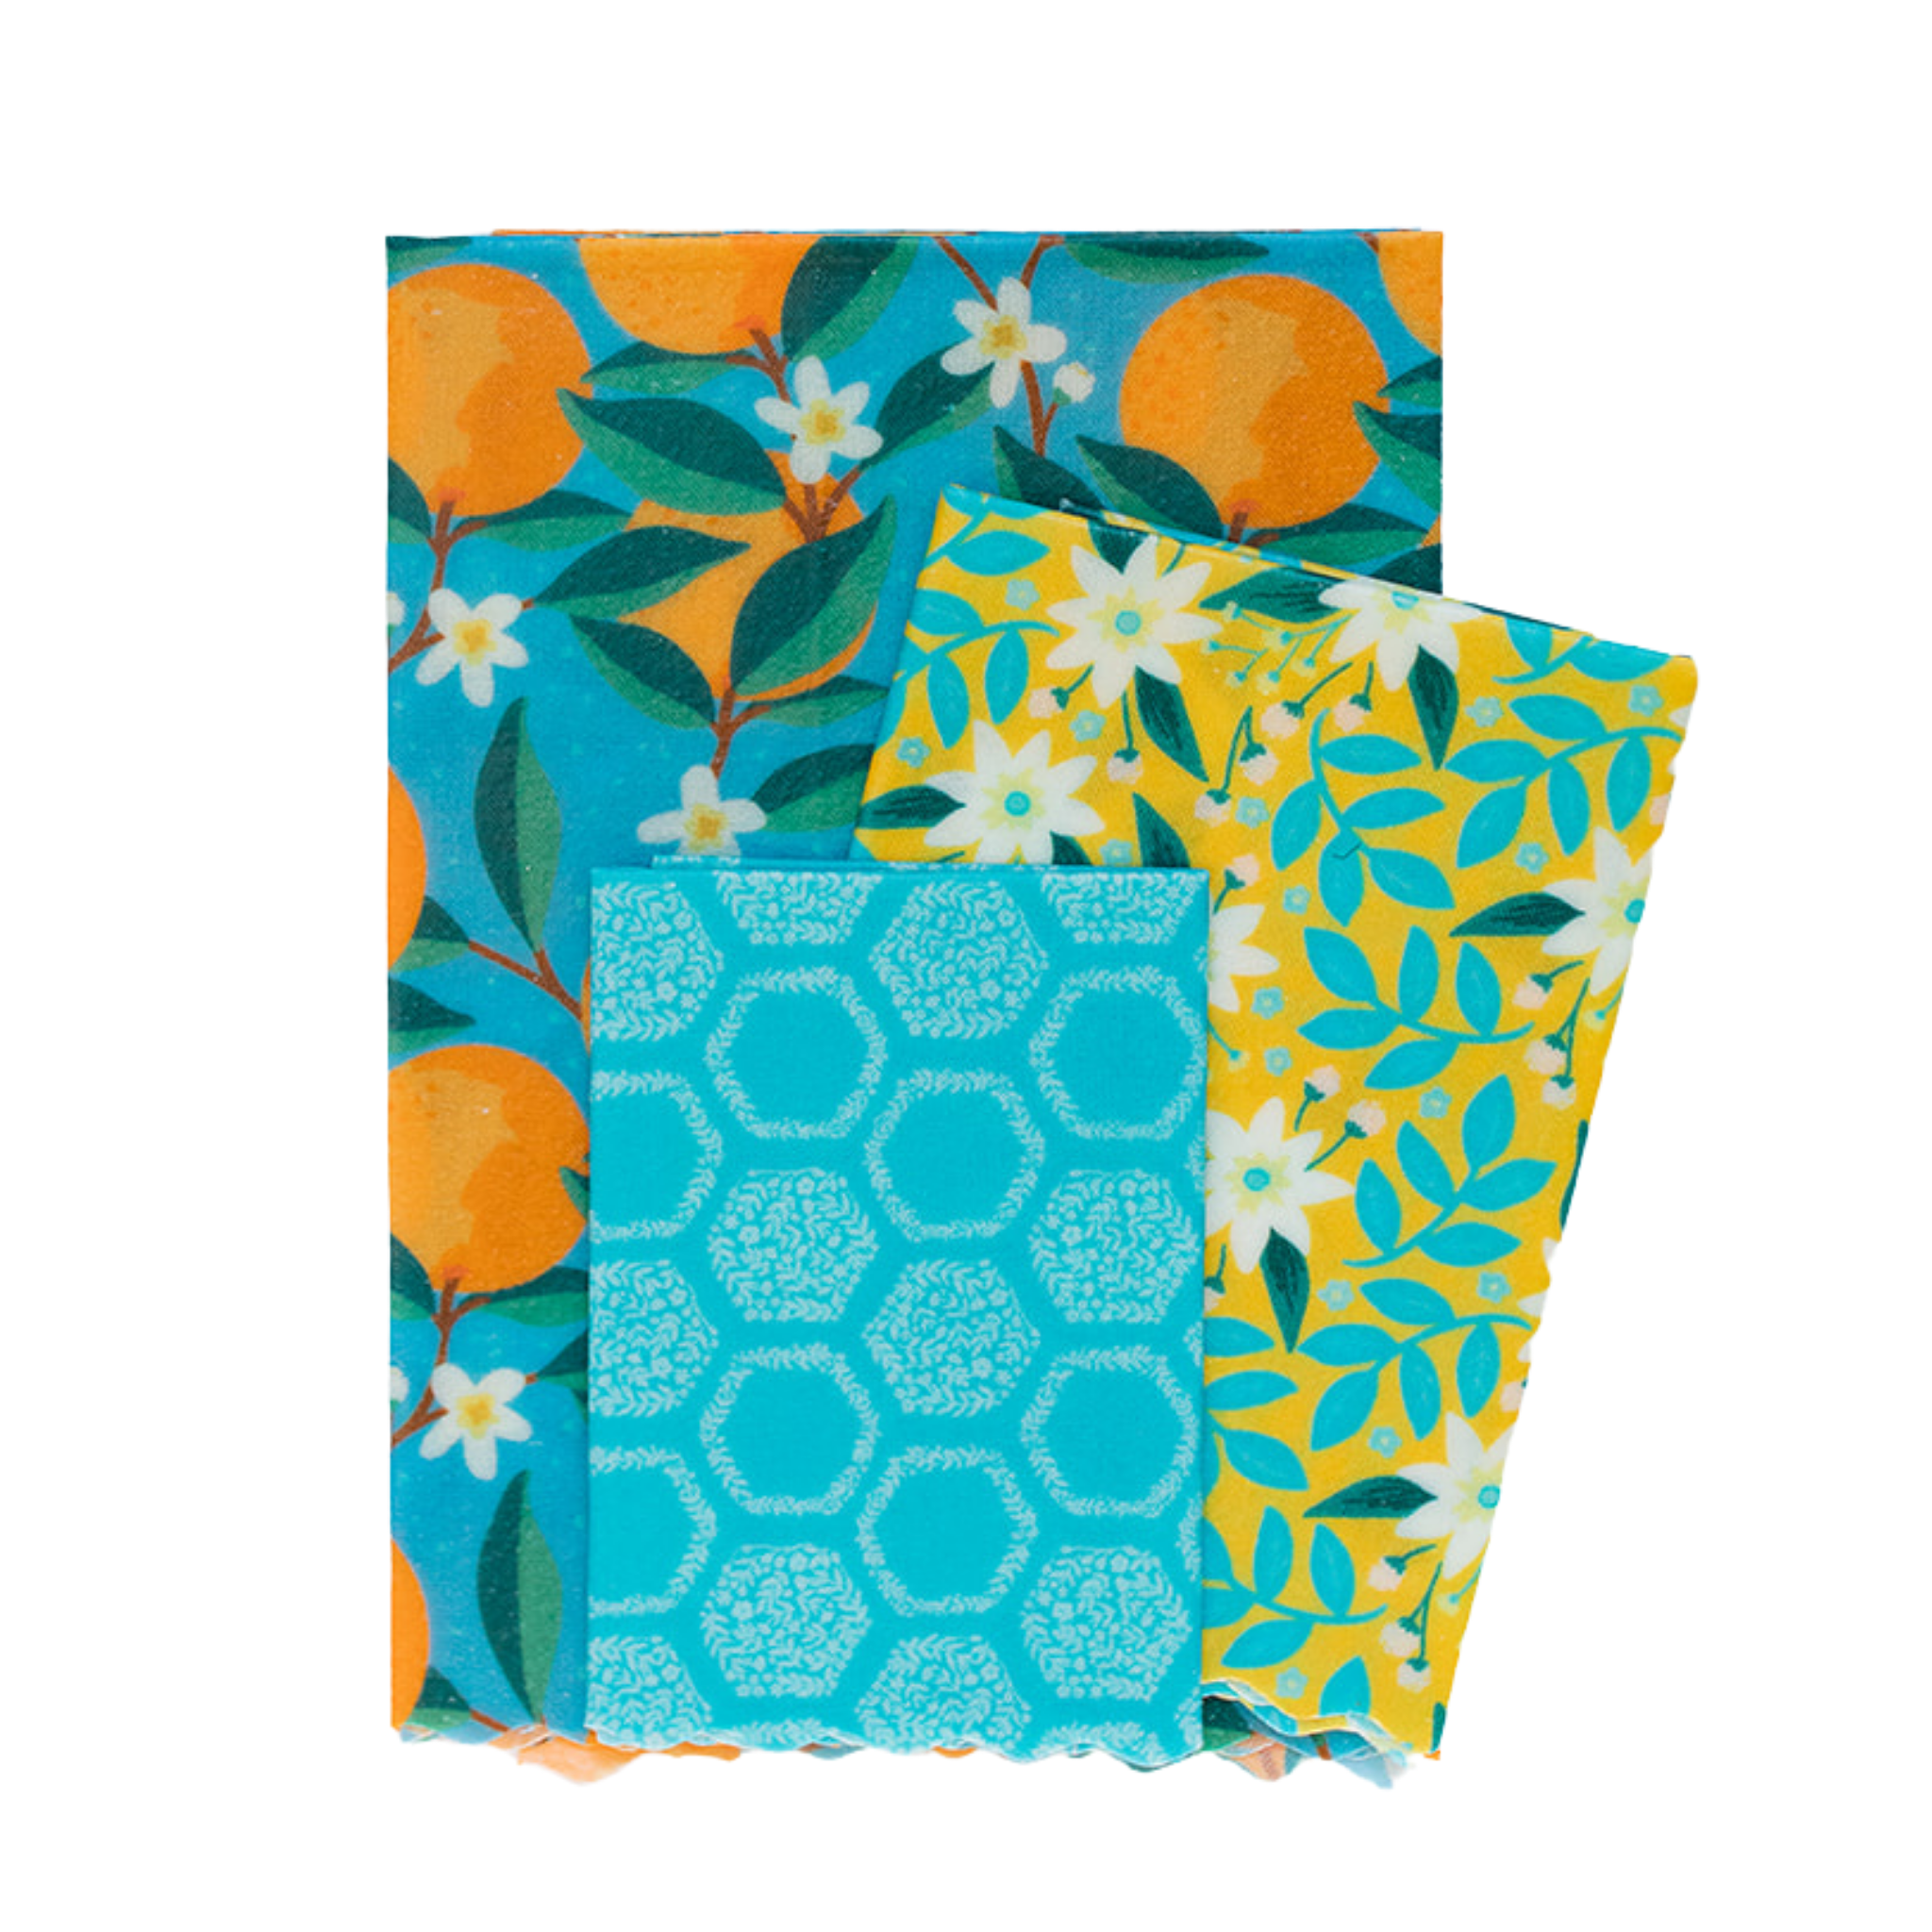 Good Buy Supply® Beeswax Wraps - Pack of 3